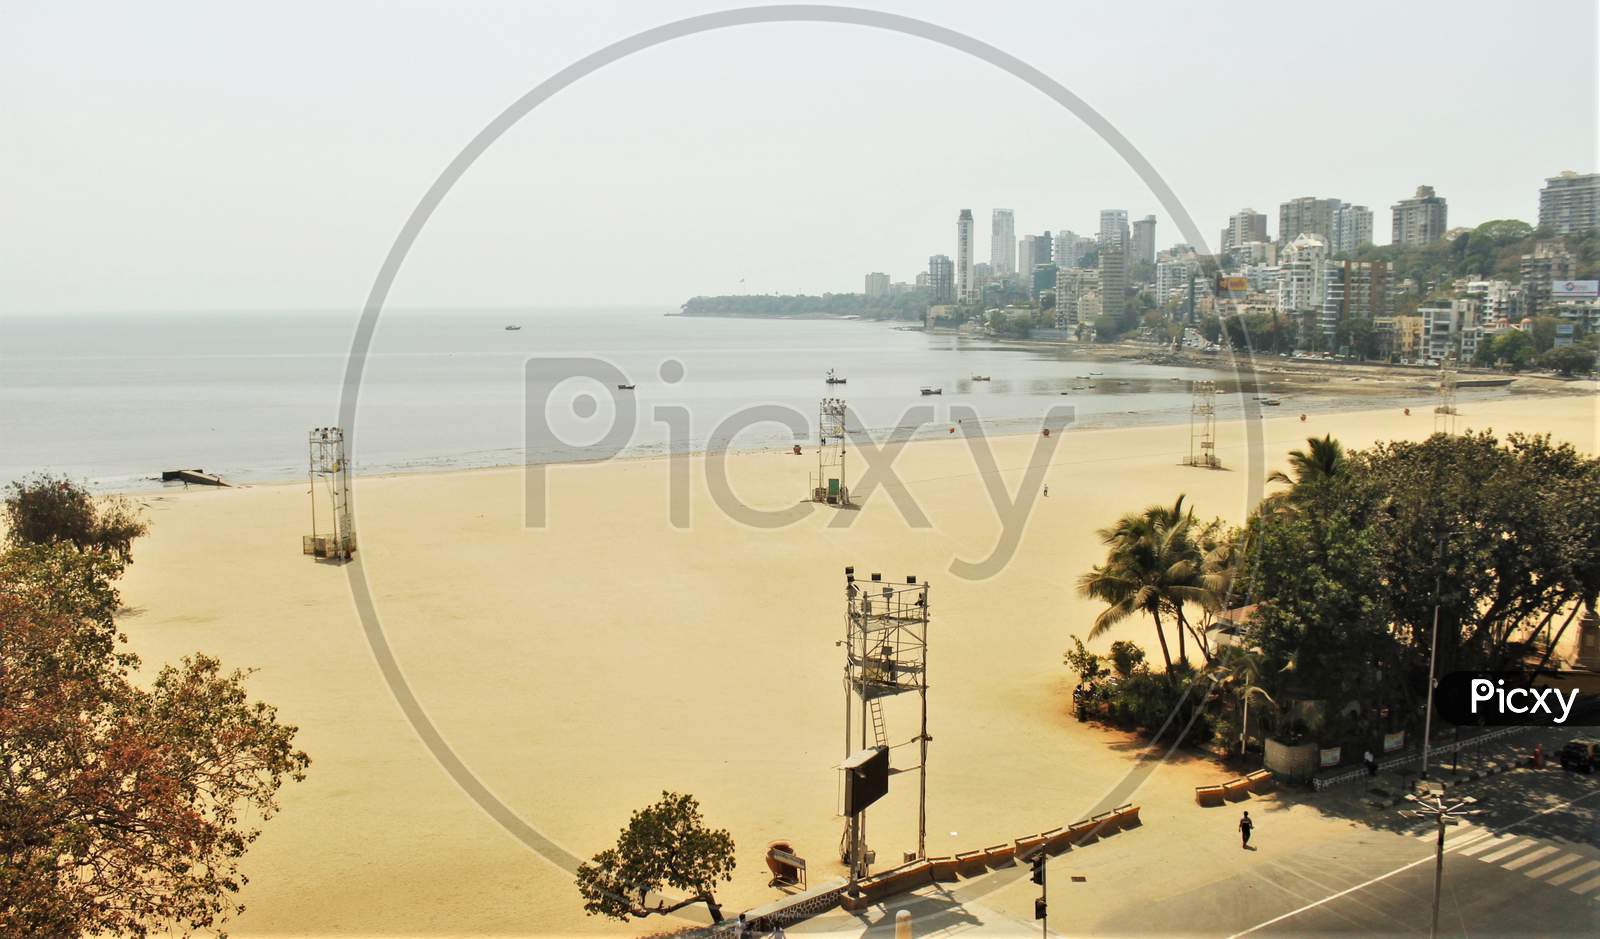 The otherwise busy Girgaon Chowpatty beach is seen deserted after the Maharashtra state government banned public gatherings to avoid the spreading of the coronavirus, in Mumbai, India on March 18, 2020.